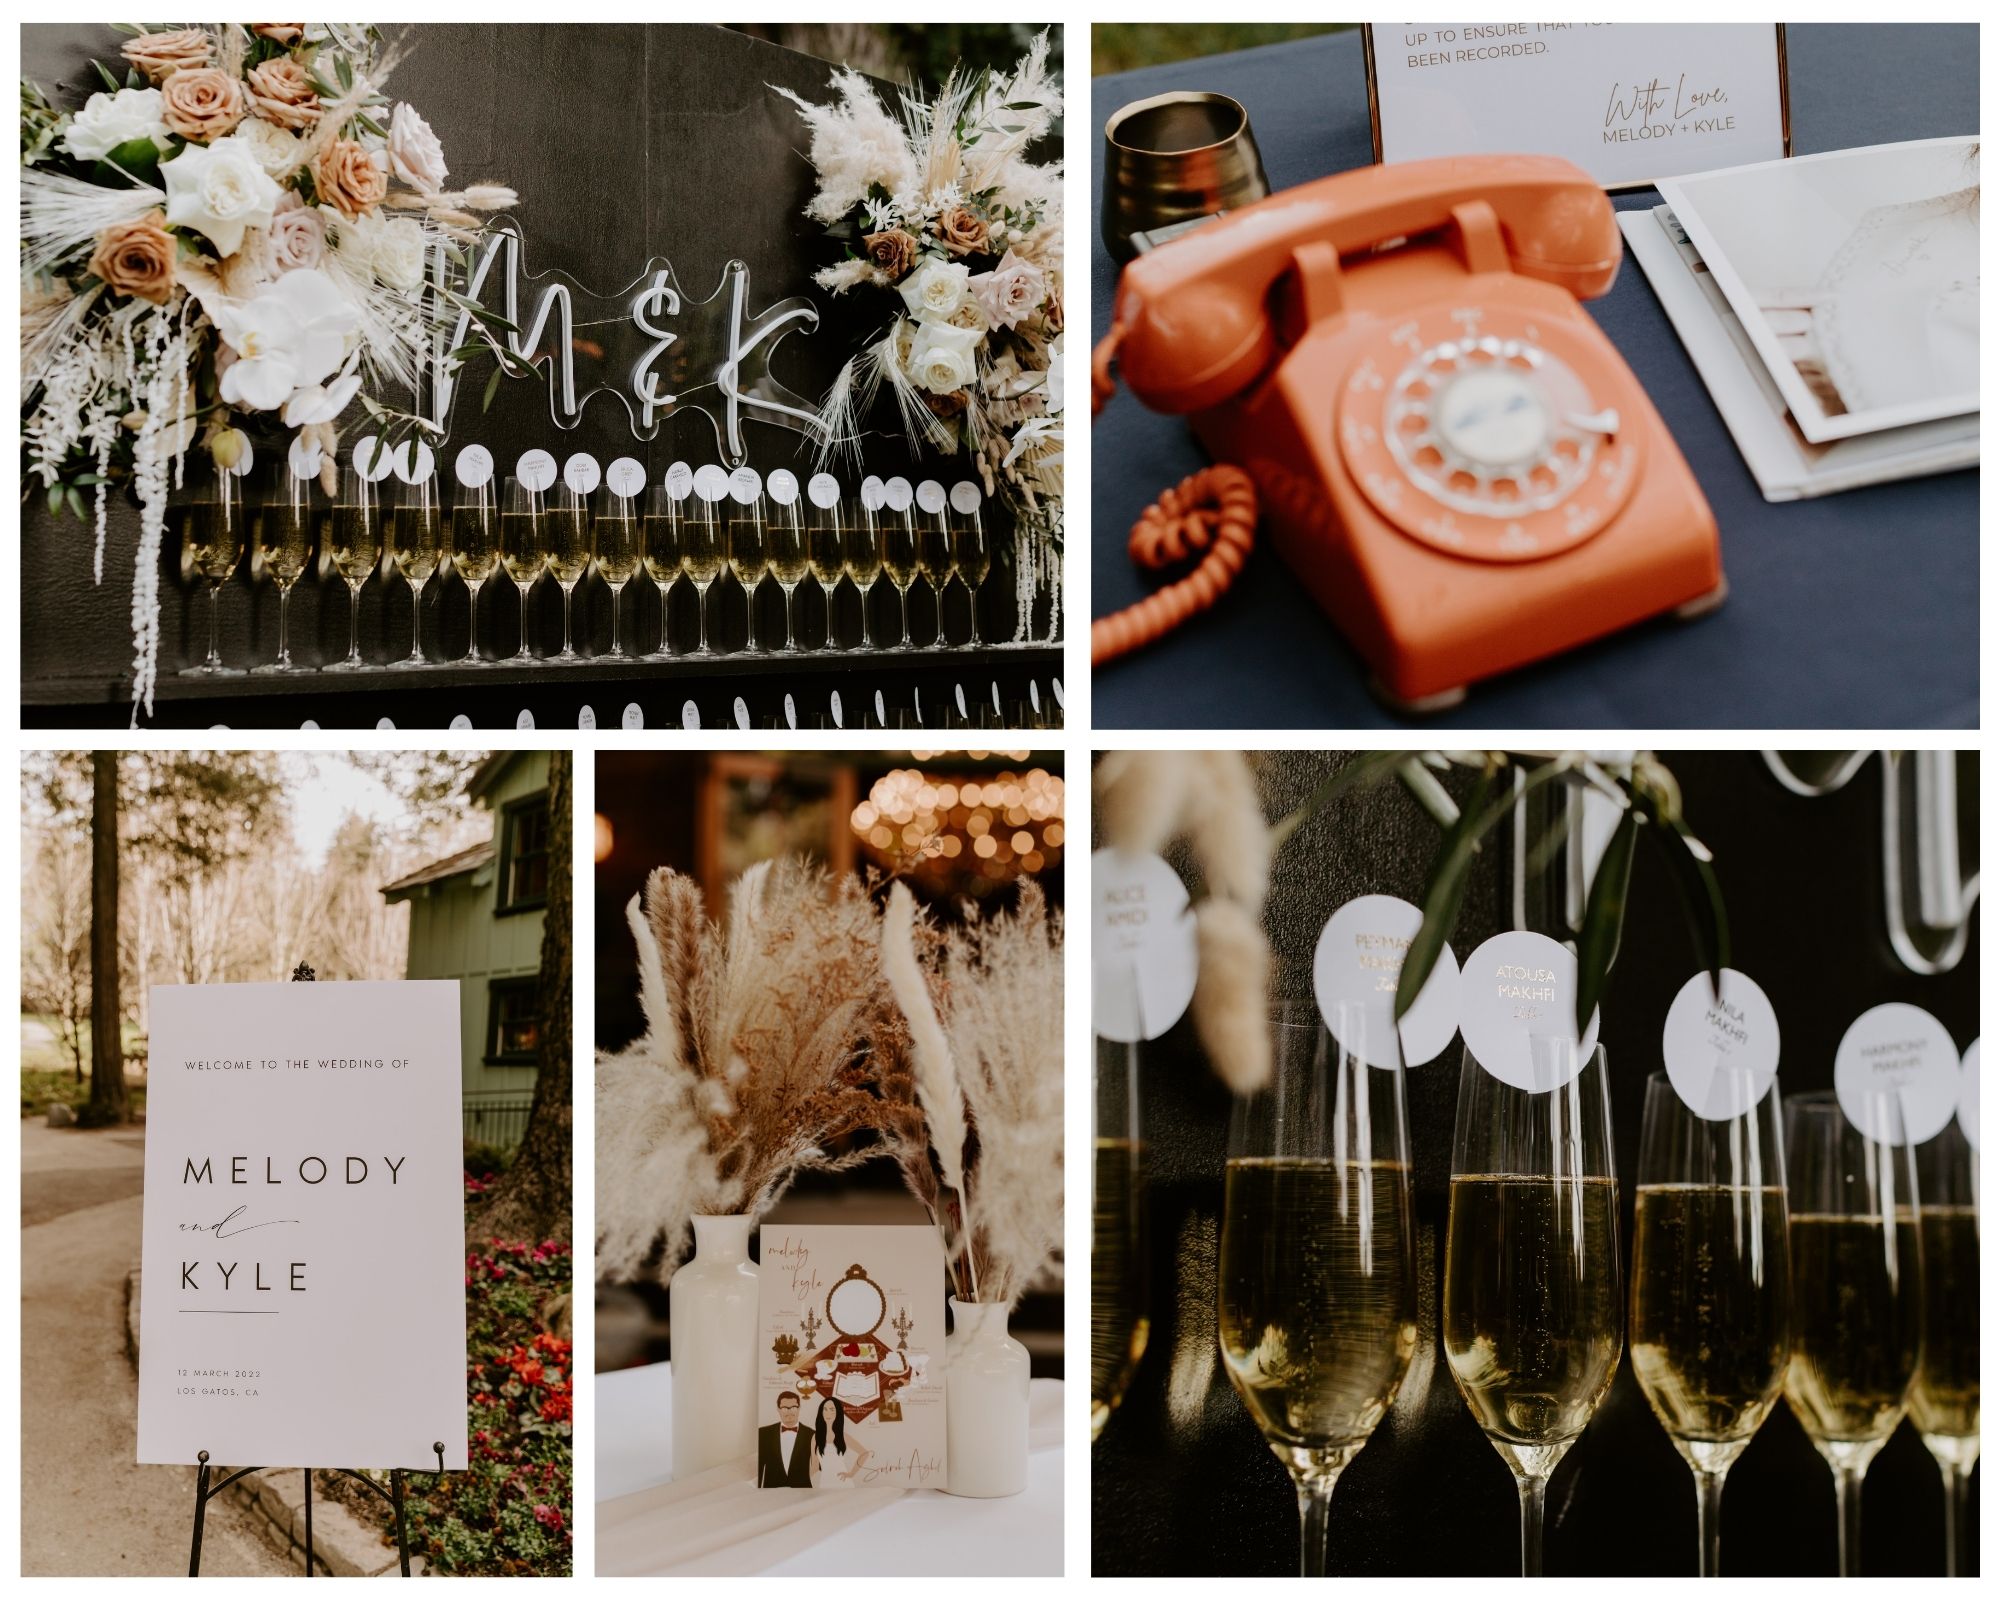 Wedding Collage wine wall and phone guest book